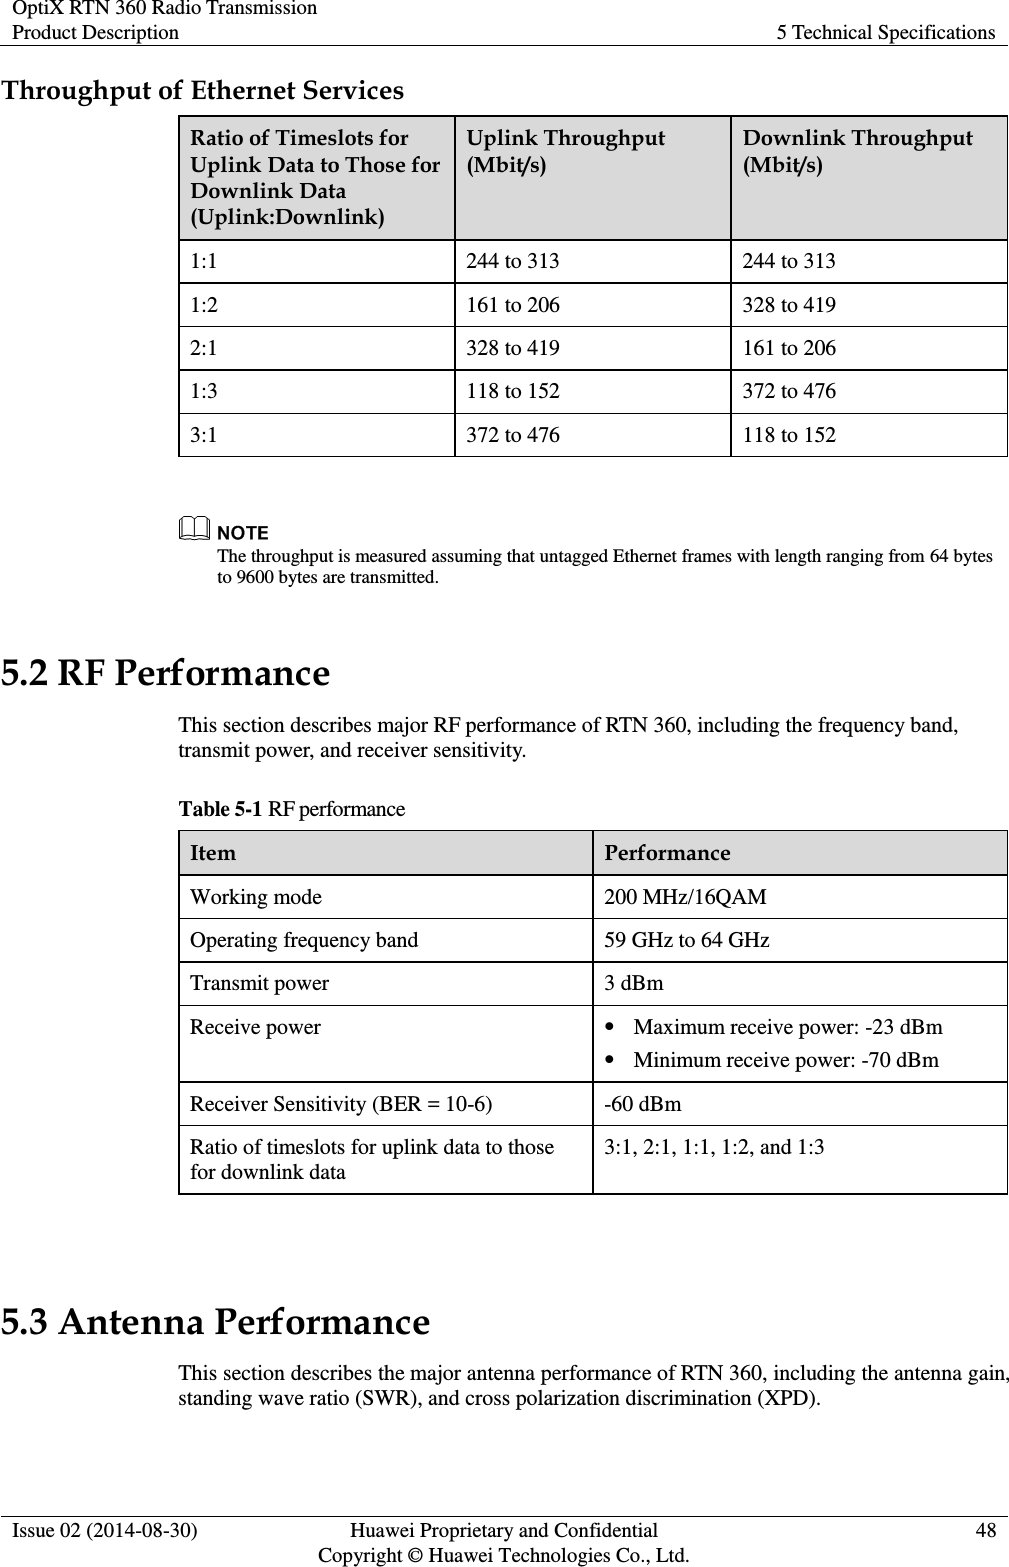 OptiX RTN 360 Radio Transmission Product Description 5 Technical Specifications  Issue 02 (2014-08-30) Huawei Proprietary and Confidential                                     Copyright © Huawei Technologies Co., Ltd. 48  Throughput of Ethernet Services Ratio of Timeslots for Uplink Data to Those for Downlink Data (Uplink:Downlink) Uplink Throughput (Mbit/s) Downlink Throughput (Mbit/s) 1:1 244 to 313 244 to 313 1:2 161 to 206 328 to 419 2:1 328 to 419 161 to 206 1:3 118 to 152 372 to 476 3:1 372 to 476 118 to 152   The throughput is measured assuming that untagged Ethernet frames with length ranging from 64 bytes to 9600 bytes are transmitted. 5.2 RF Performance This section describes major RF performance of RTN 360, including the frequency band, transmit power, and receiver sensitivity. Table 5-1 RF performance Item Performance Working mode 200 MHz/16QAM Operating frequency band 59 GHz to 64 GHz Transmit power 3 dBm Receive power  Maximum receive power: -23 dBm  Minimum receive power: -70 dBm Receiver Sensitivity (BER = 10-6) -60 dBm Ratio of timeslots for uplink data to those for downlink data 3:1, 2:1, 1:1, 1:2, and 1:3  5.3 Antenna Performance This section describes the major antenna performance of RTN 360, including the antenna gain, standing wave ratio (SWR), and cross polarization discrimination (XPD). 